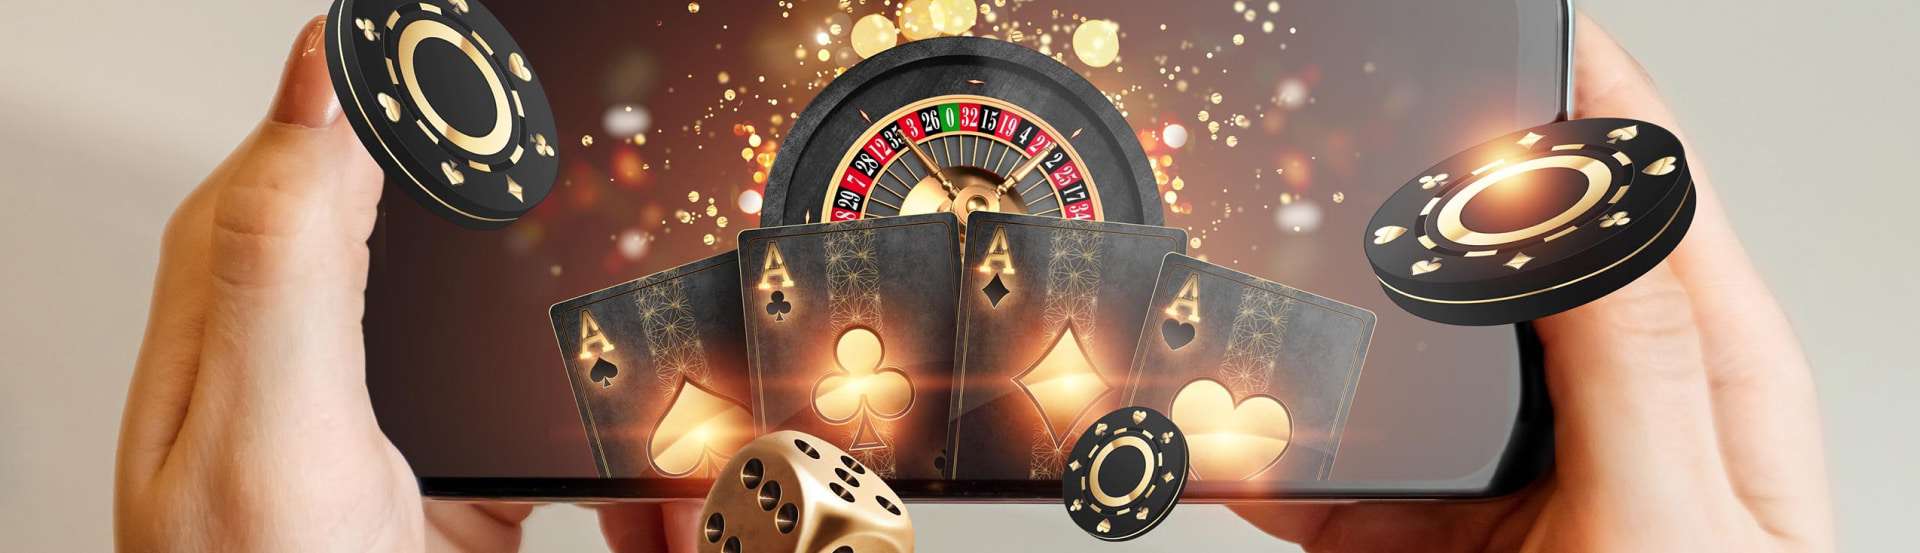 Best online casino games in New Zealand for free ana real money